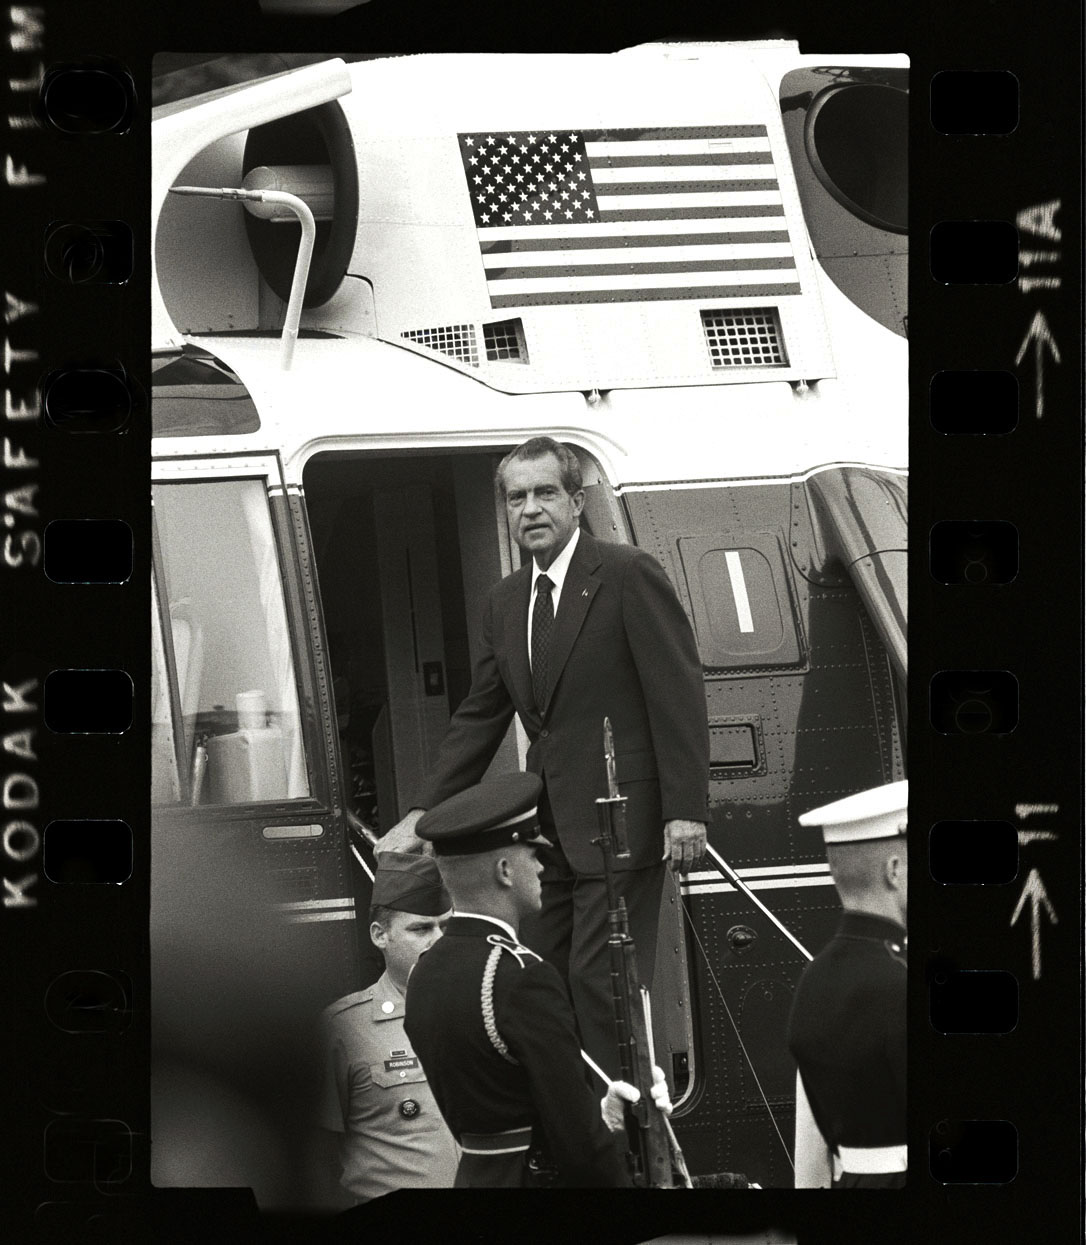 WASHINGTON - AUGUST 9:  President Richard Nixon waves goodbye as he boards a helicopter to leave from the South Lawn of the White House after resigning the presidency,  August 9, 1974, in Washington, DC. In the first and last frames of this contact sheet Vice President Gerald R. Ford and Mrs. Ford say good bye.  Ford was sworn in as president minutes later. (Photo by David Hume Kennerly)